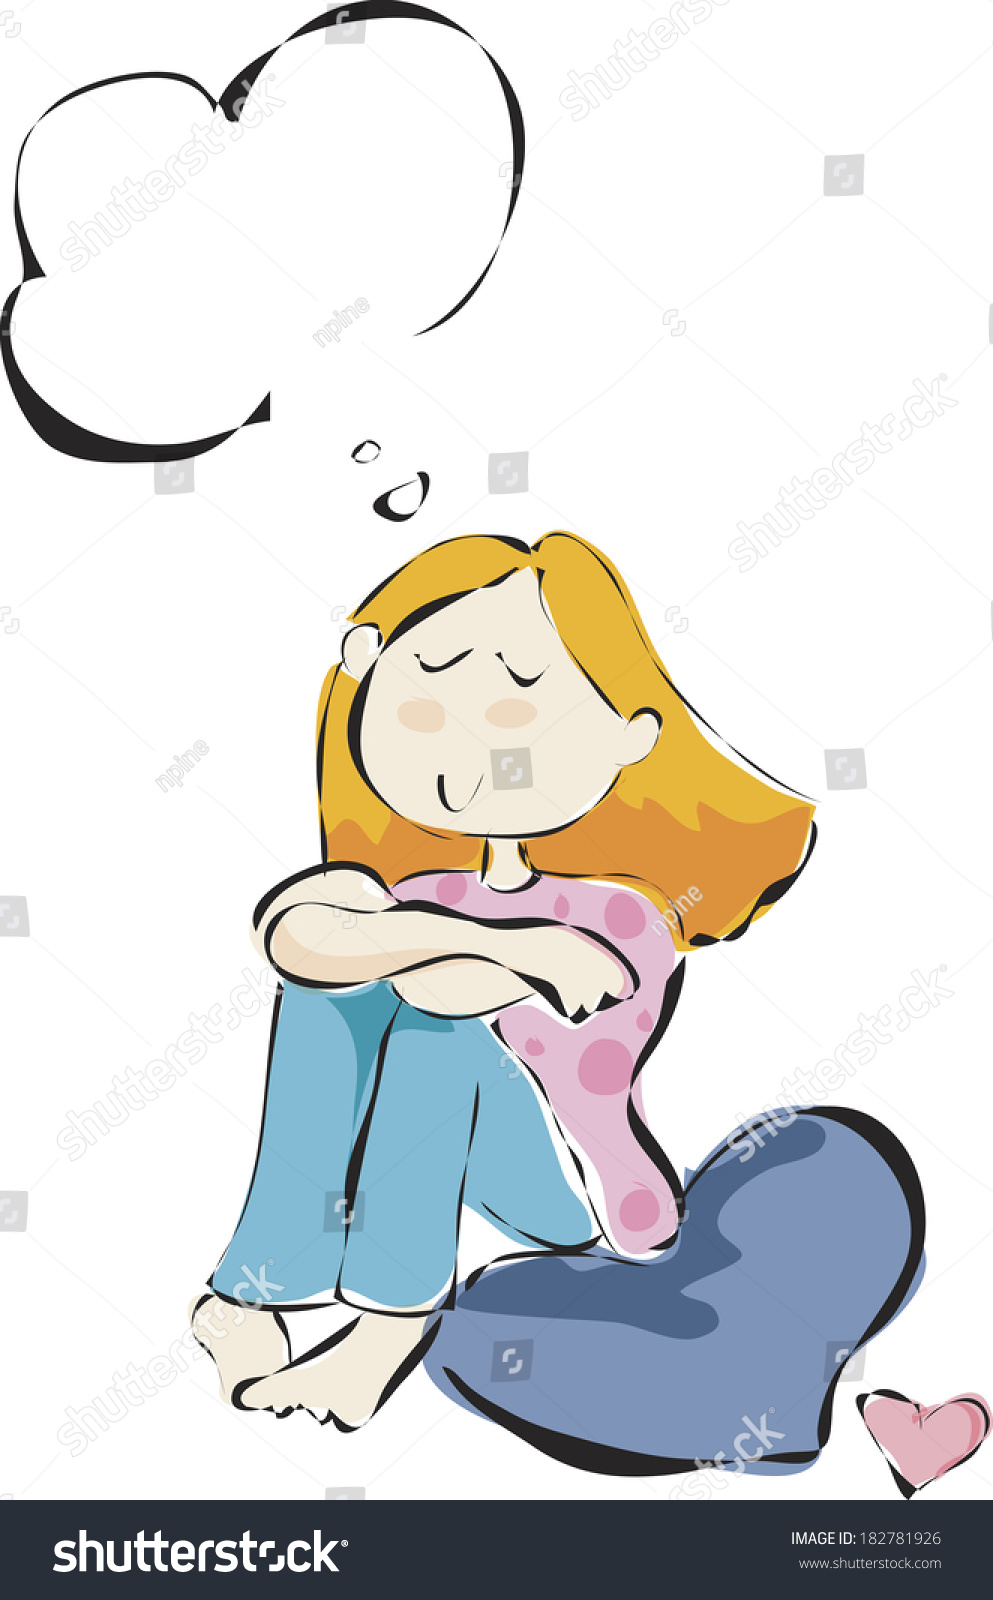 Illustration Of A Girl Daydreaming - 182781926 : Shutterstock